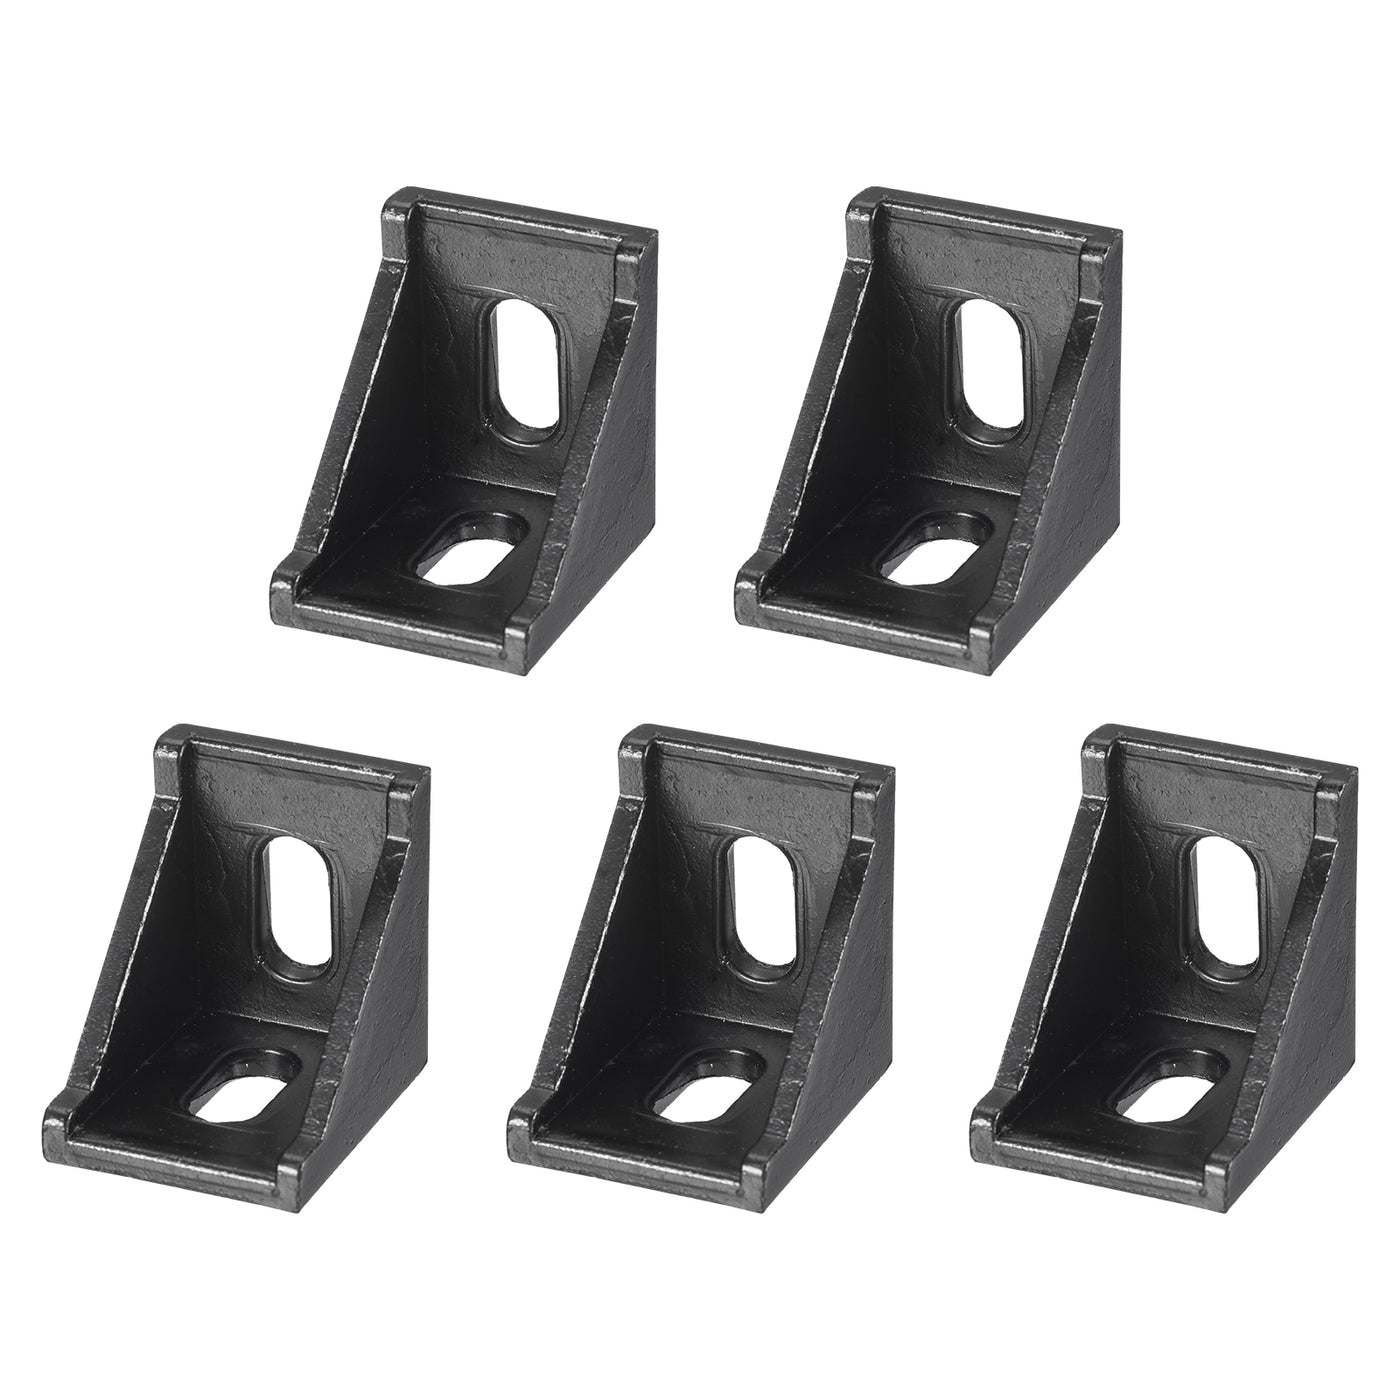 uxcell Uxcell 5Pcs Inside Corner Bracket Gusset, 35x35x29mm 3030 Angle Connectors for 3030 Series Aluminum Extrusion Profile Black